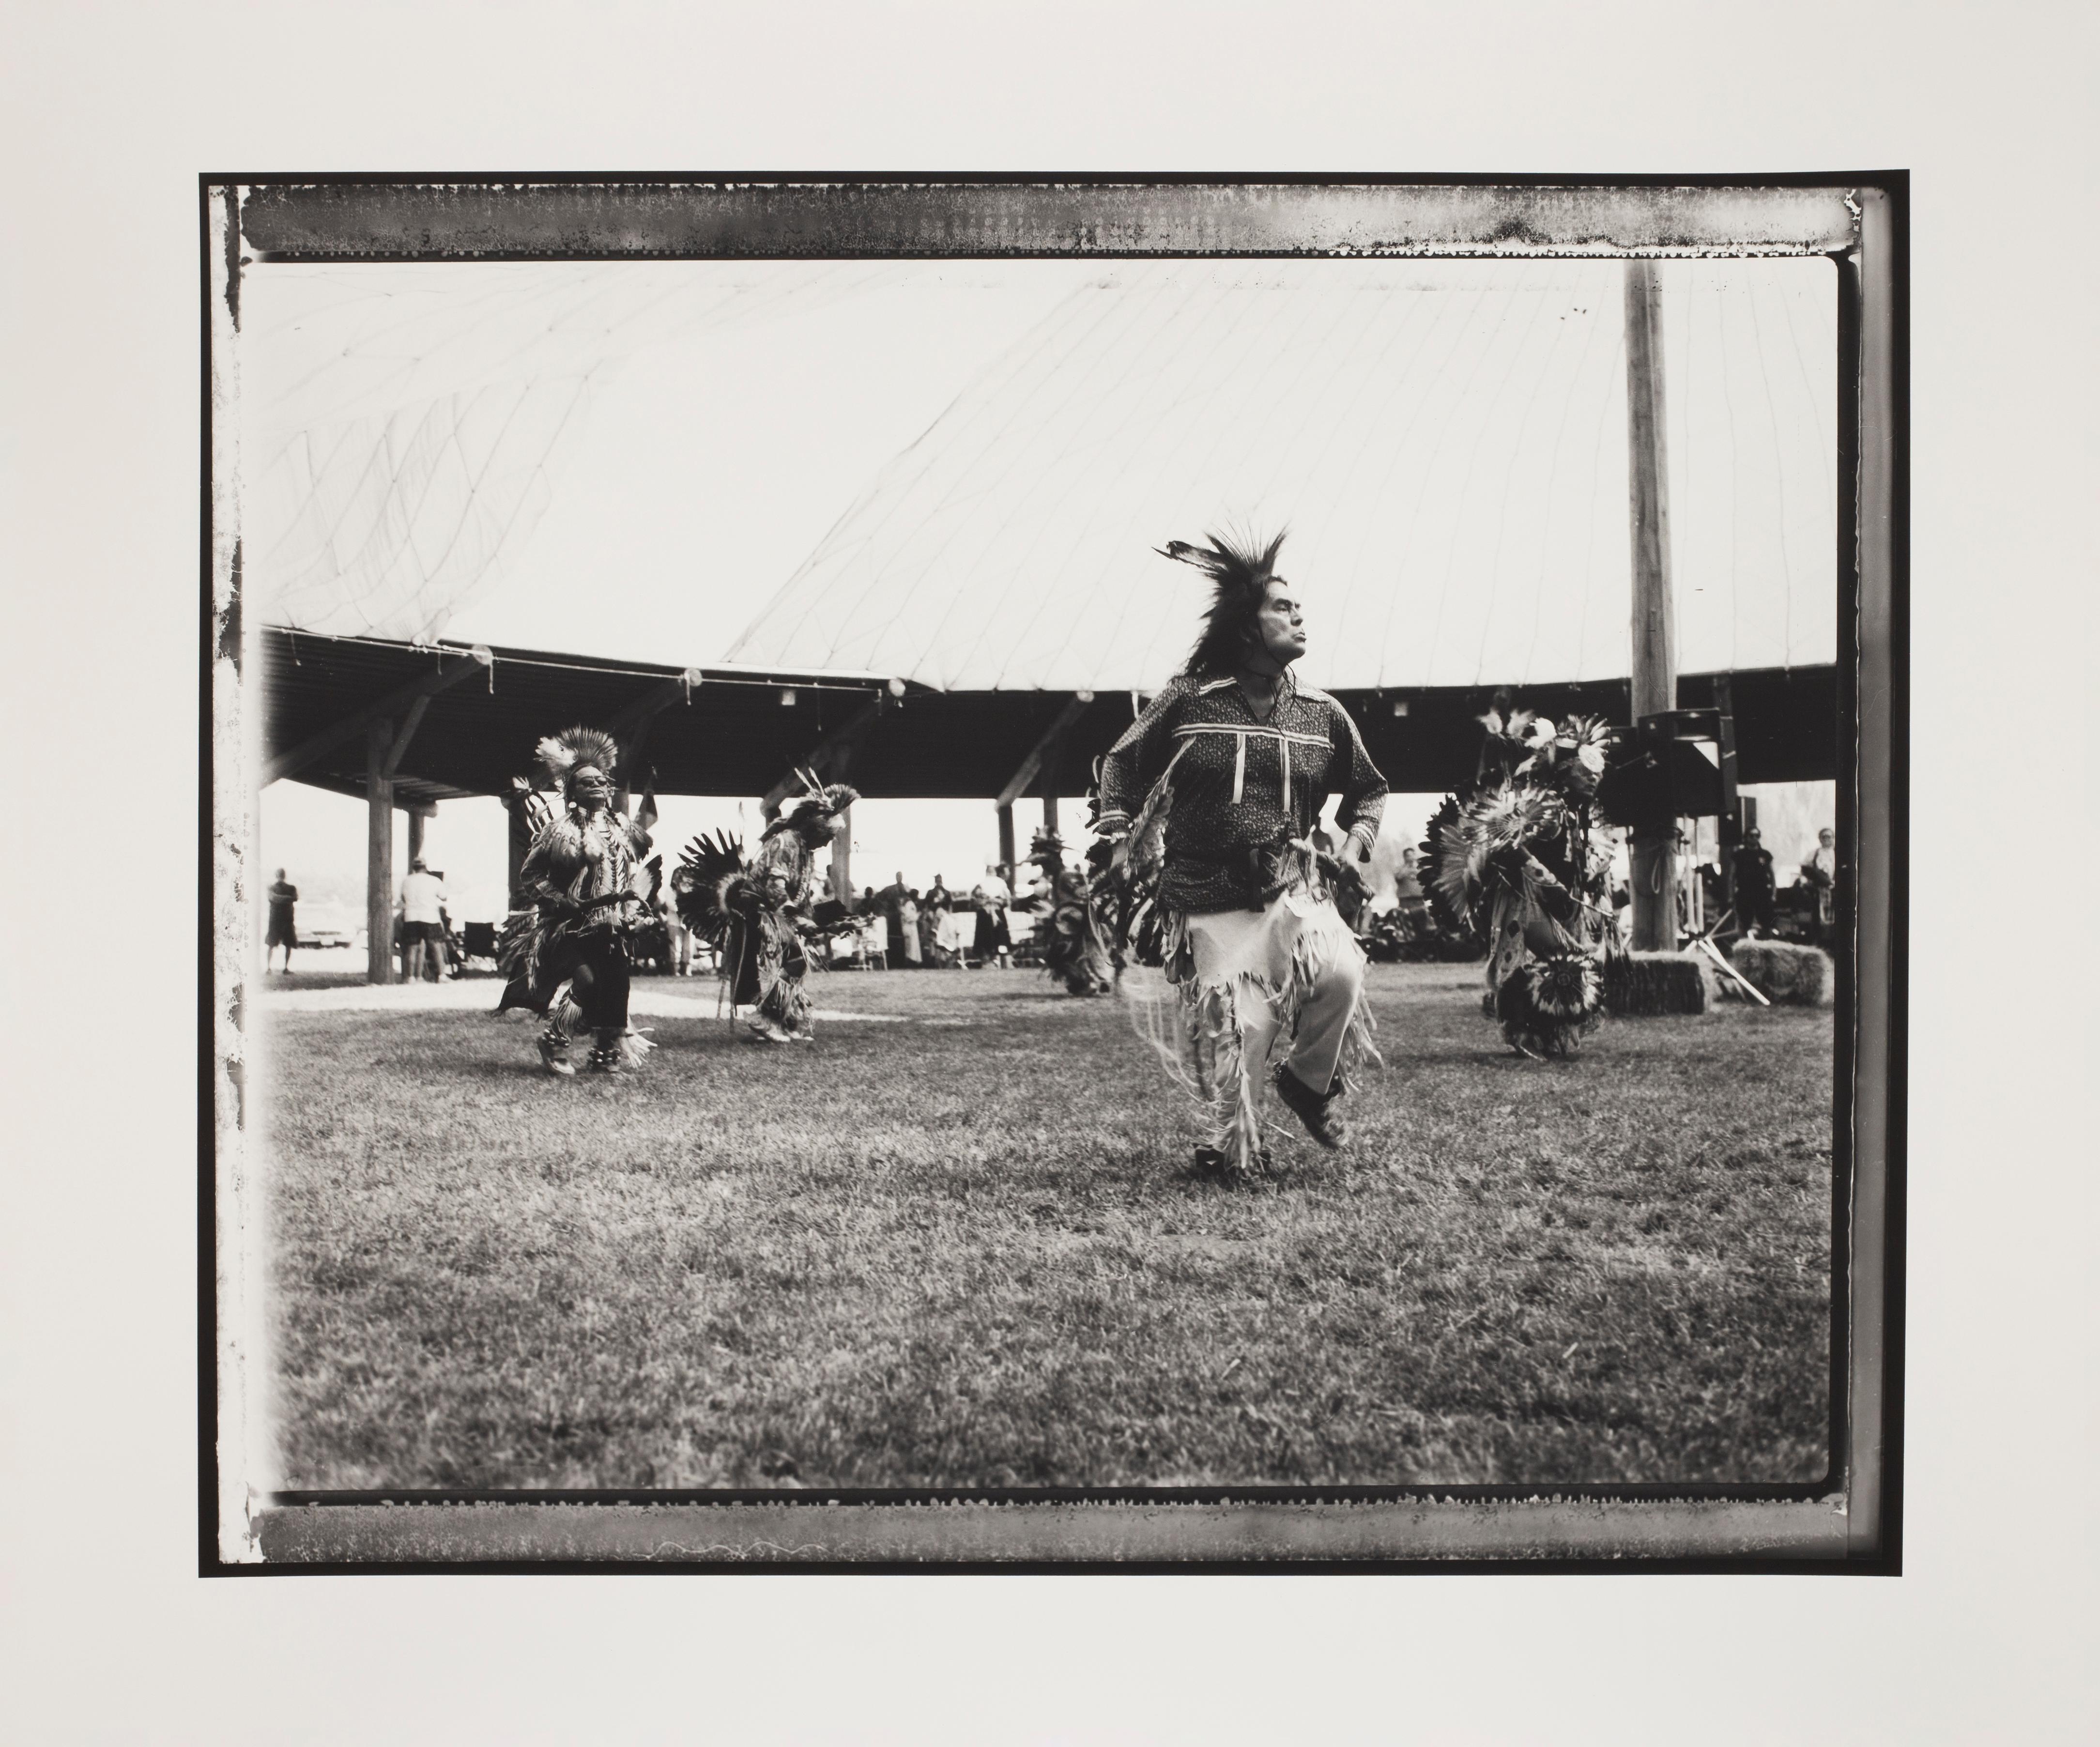 Hunter Barnes has documented his stay when joining the Tamkaliks Powwow in Wallowa, Oregon.
This work is an artist proof, archival silver gelatin, handprinted by the artist  and signed on verso. 
Directly acquired from the artist. 

The framing is